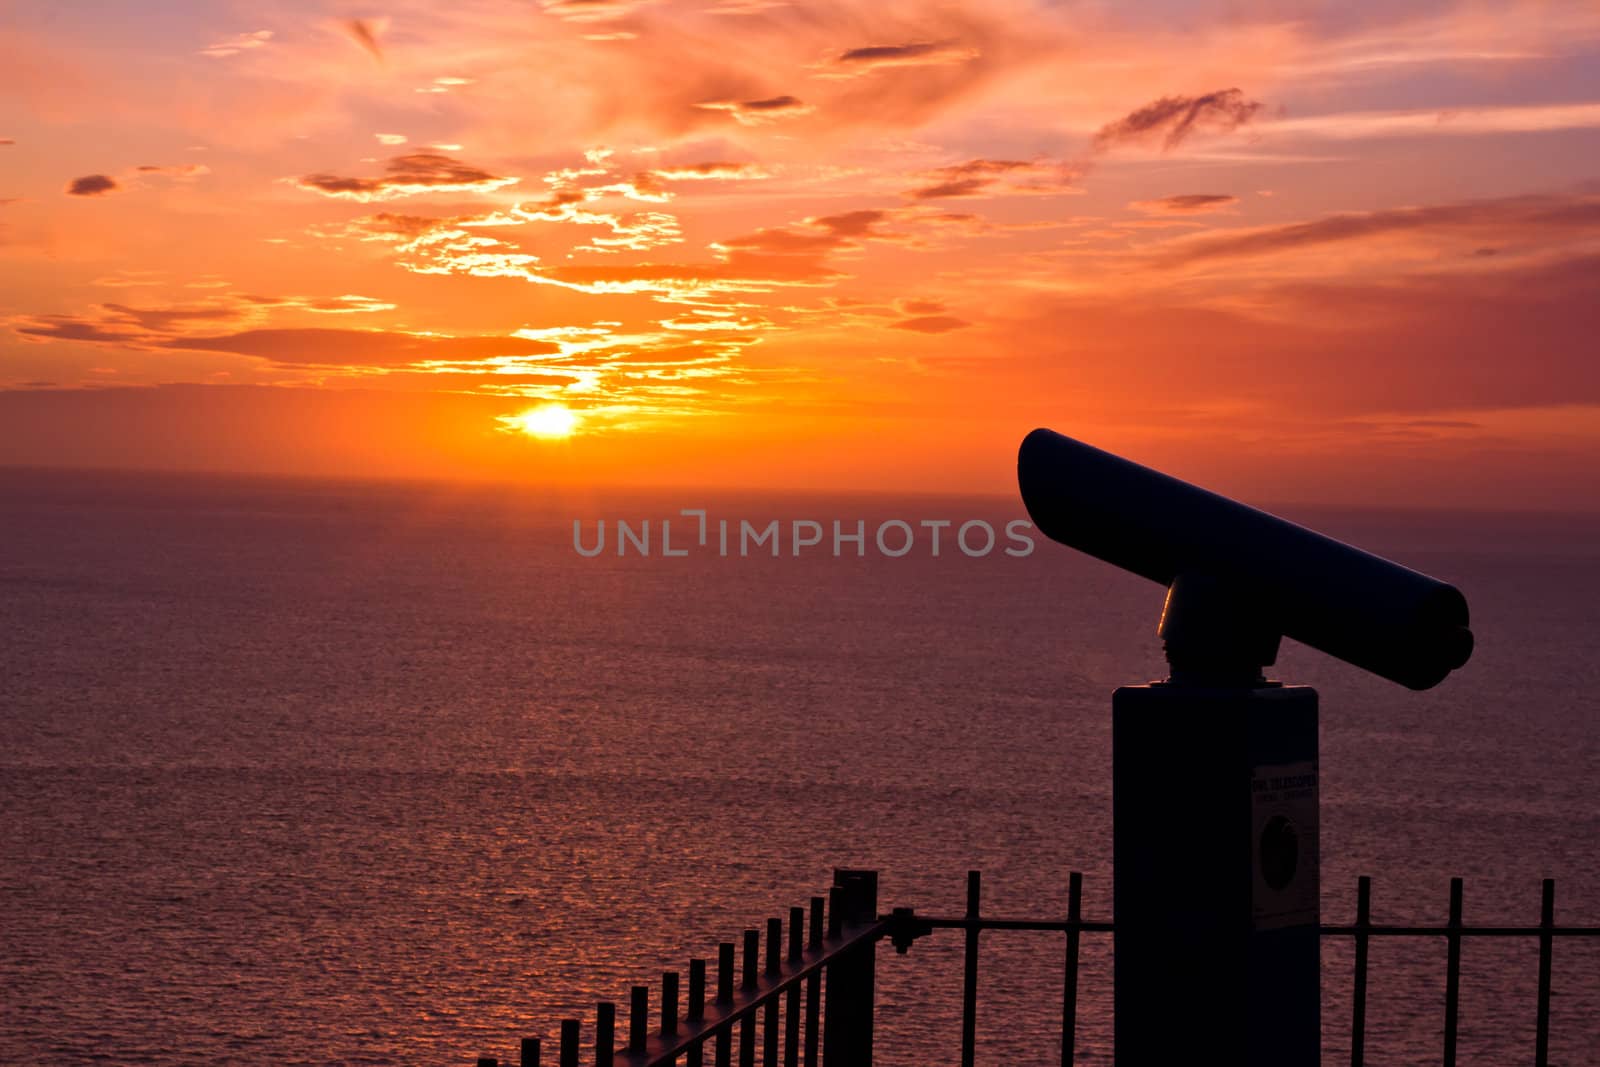 A Telescope in the Sunset at Llandudno Wales